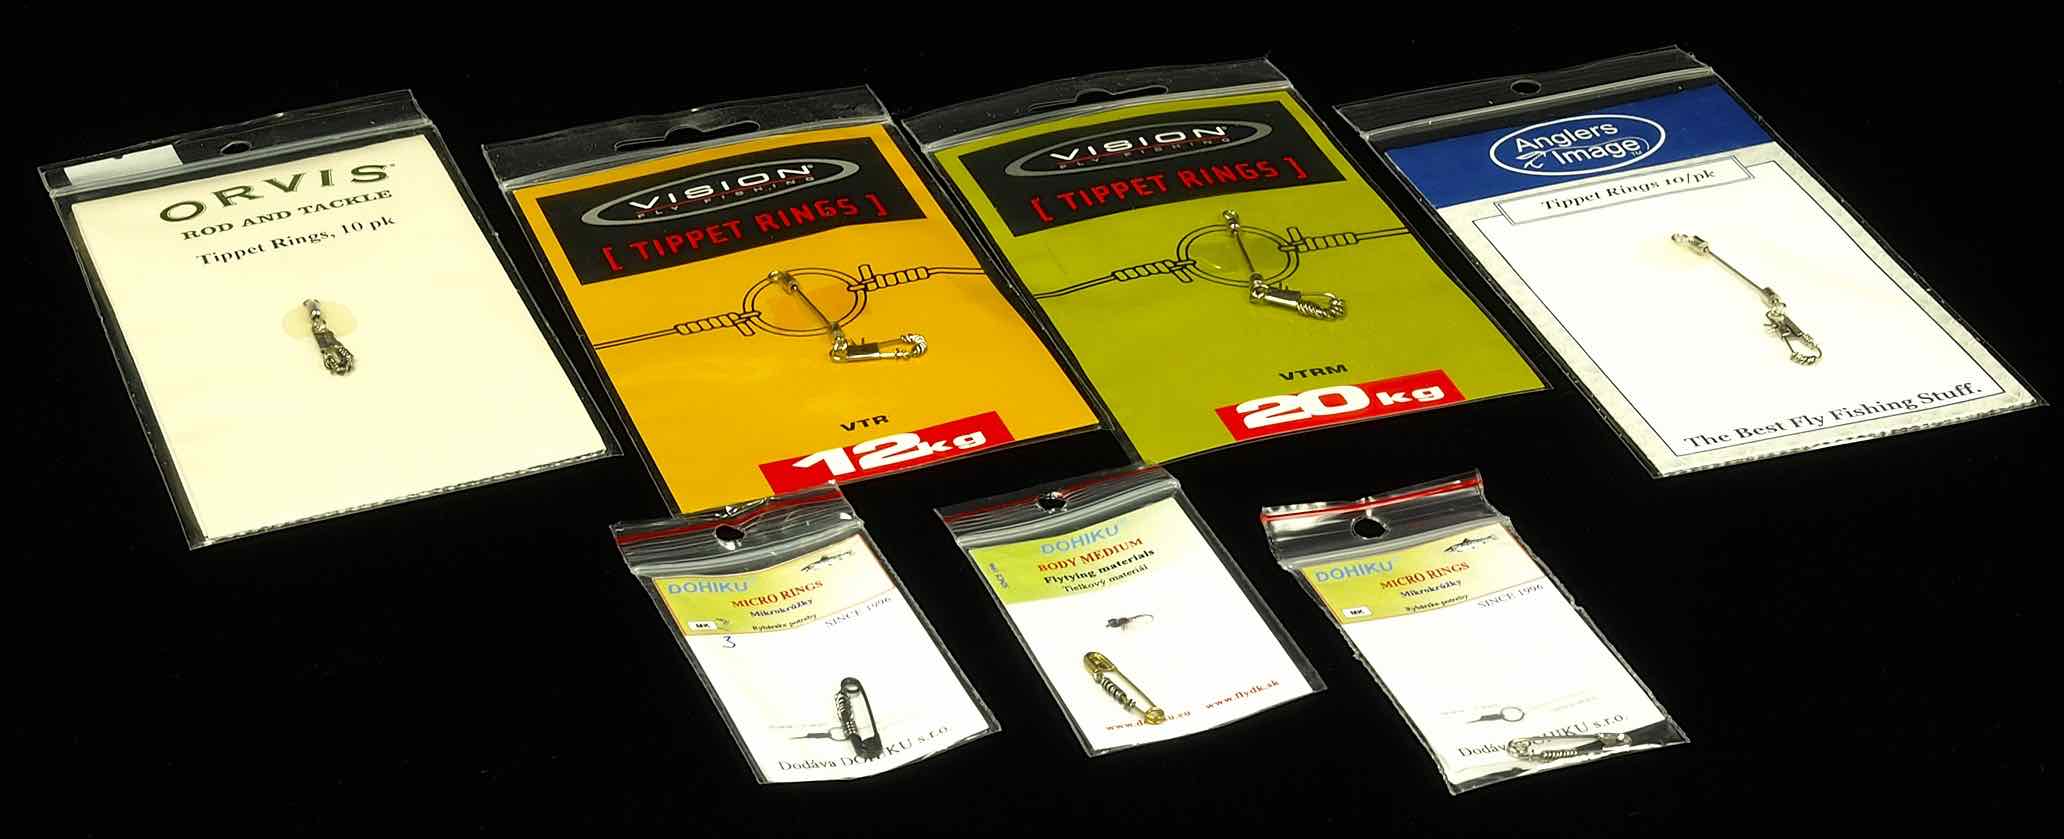 Tippet Rings – The First Cast – Hook, Line and Sinker's Fly Fishing Shop